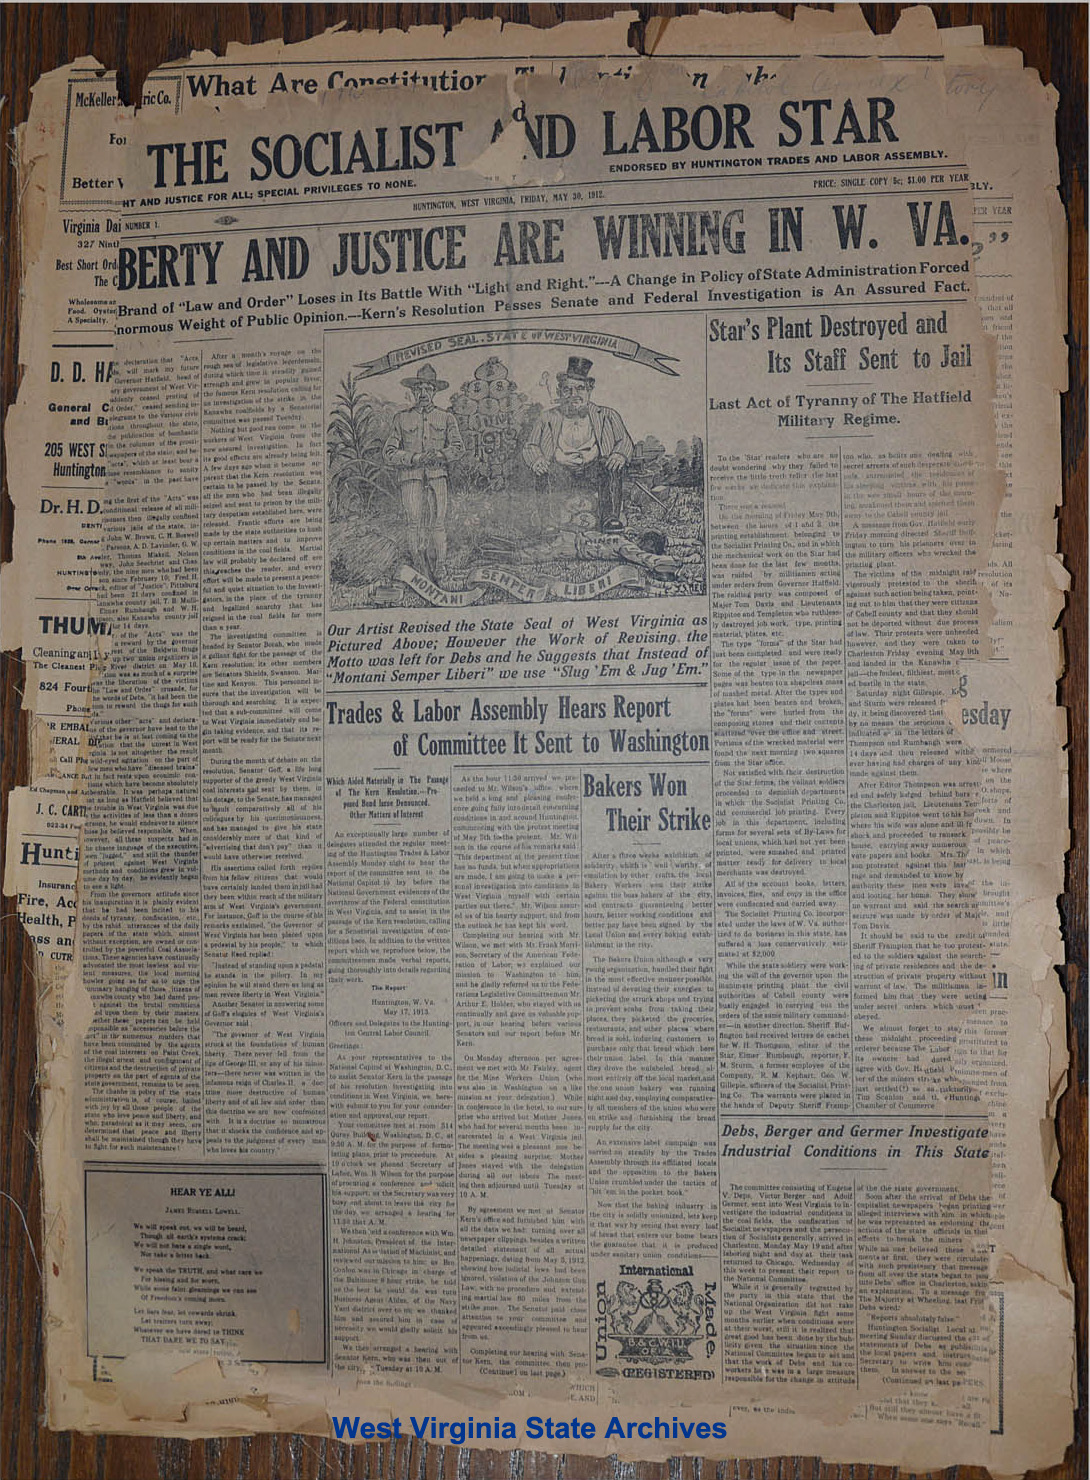 Front page of first issue of <i>Socialist and Labor Star Newspaper</i> following the destruction of their press, 1912. (Miscellaneous Newspapers, West Virginia State Archives)